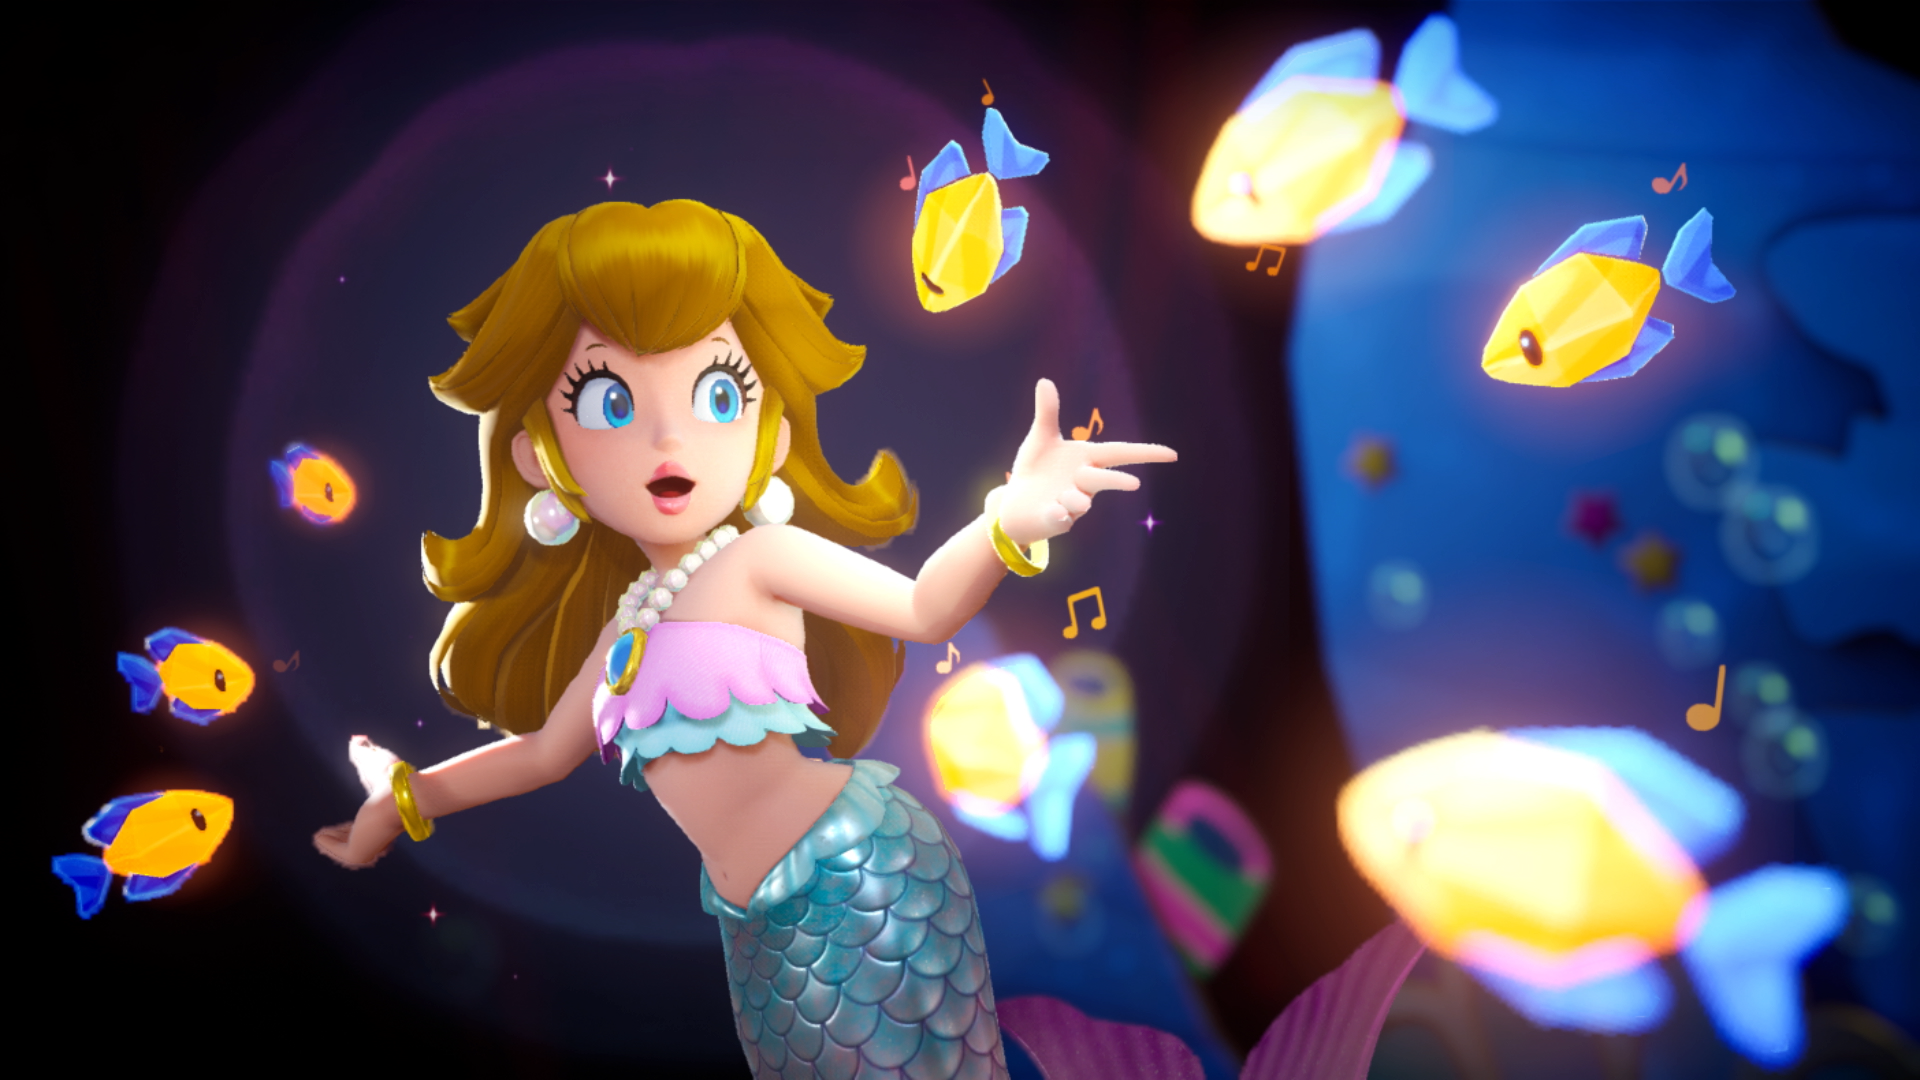 images/products_24/sw_switch_princess_peach_showtime/__screenshots/PrincessPeachShowtime_Mermaid1.png